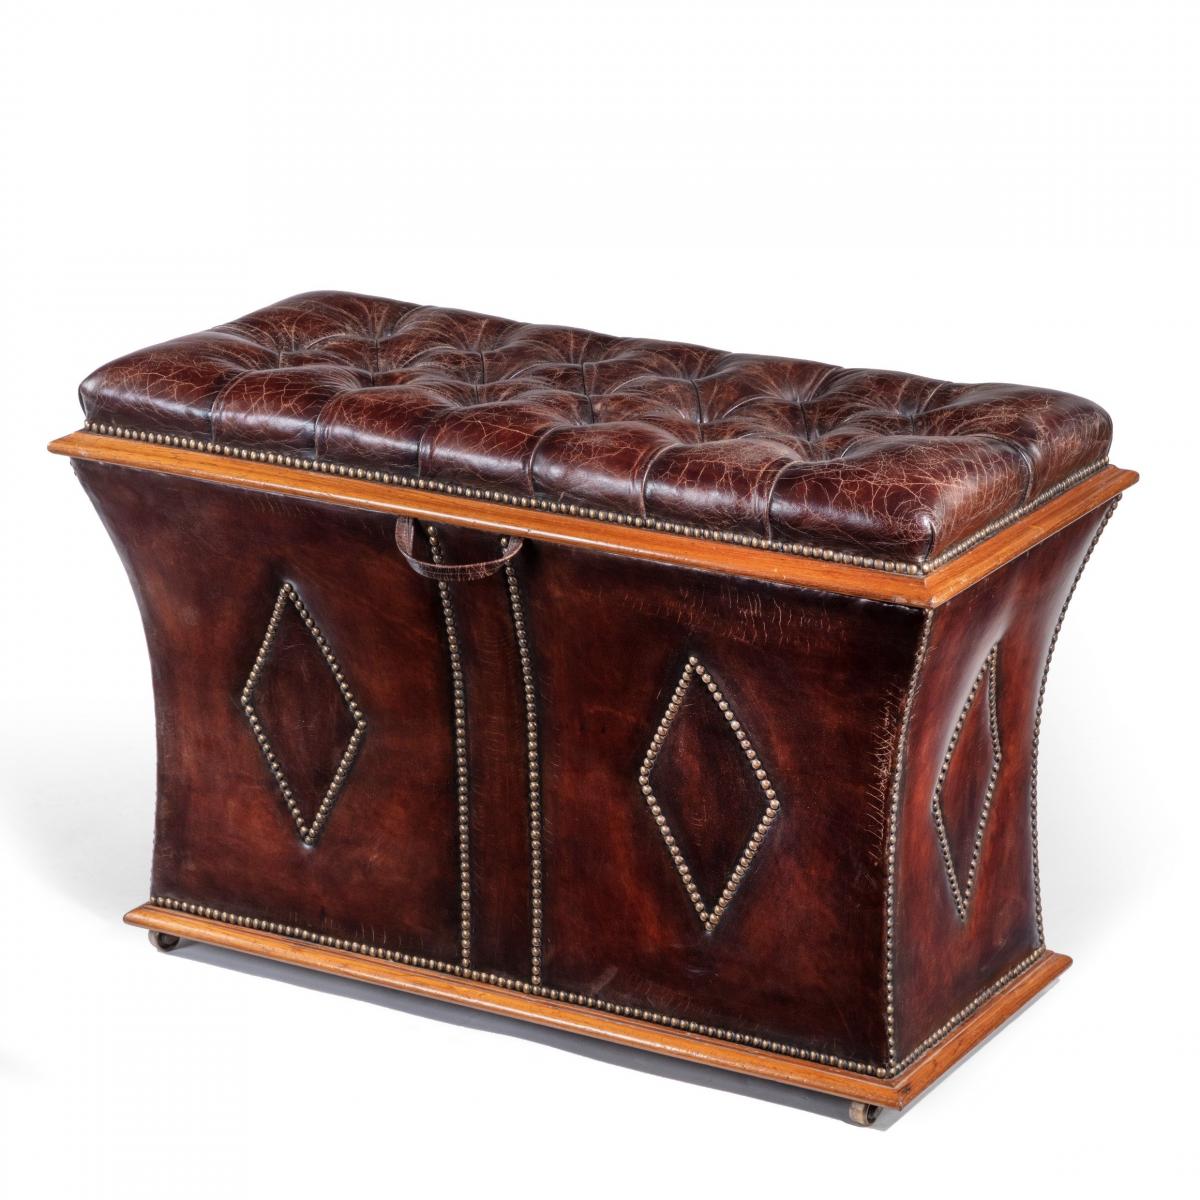 An unusual shaped William IV rosewood framed box ottoman